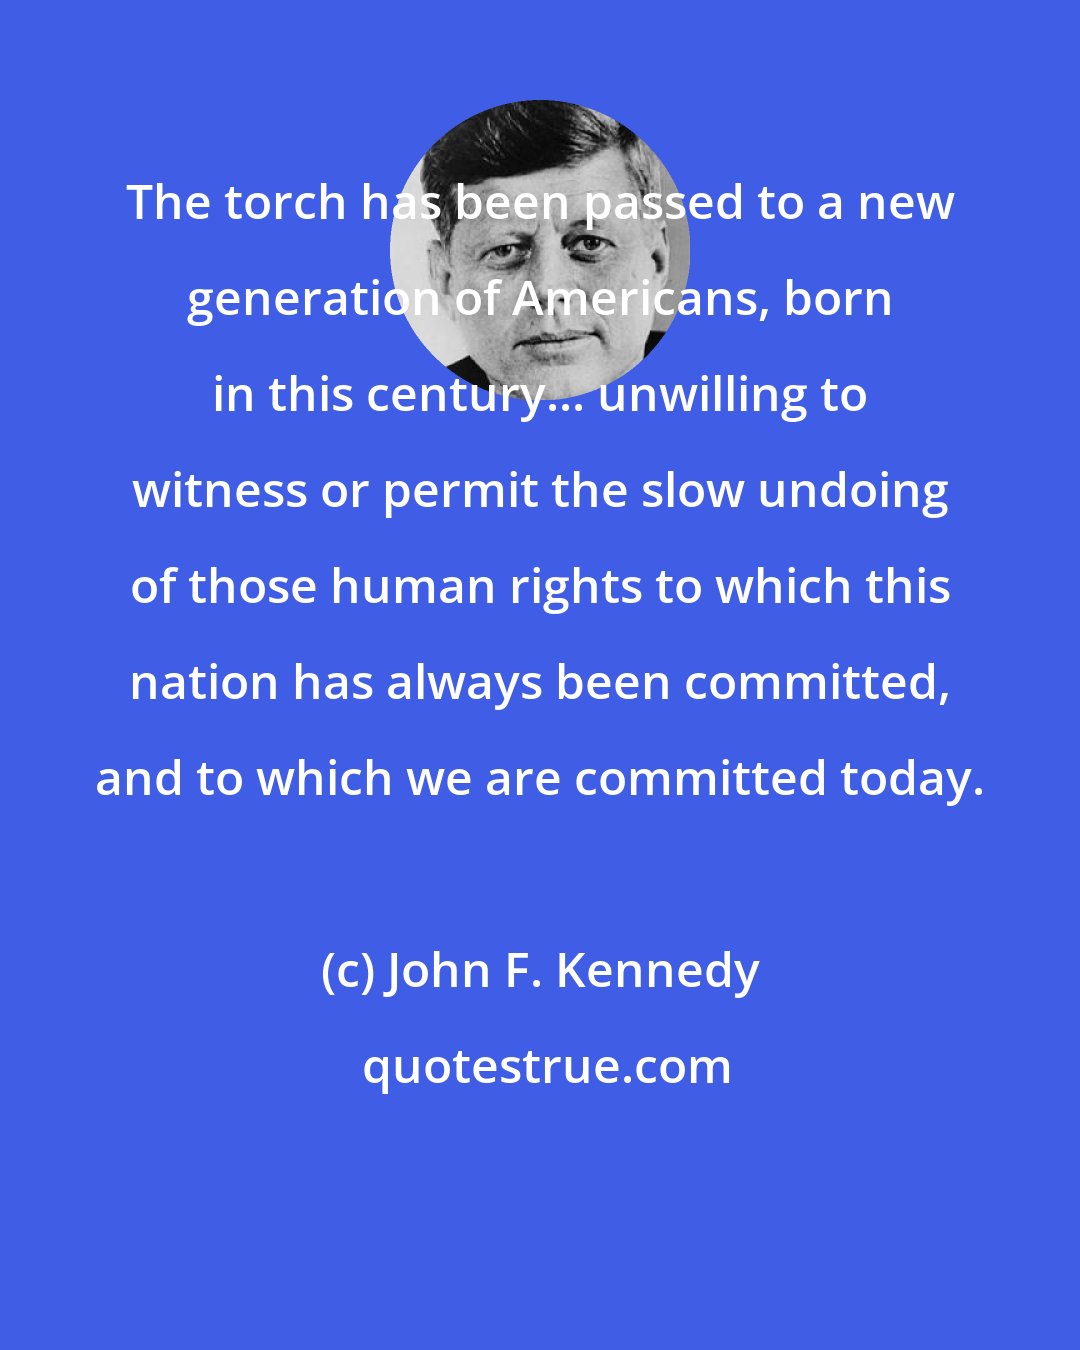 John F. Kennedy: The torch has been passed to a new generation of Americans, born in this century... unwilling to witness or permit the slow undoing of those human rights to which this nation has always been committed, and to which we are committed today.